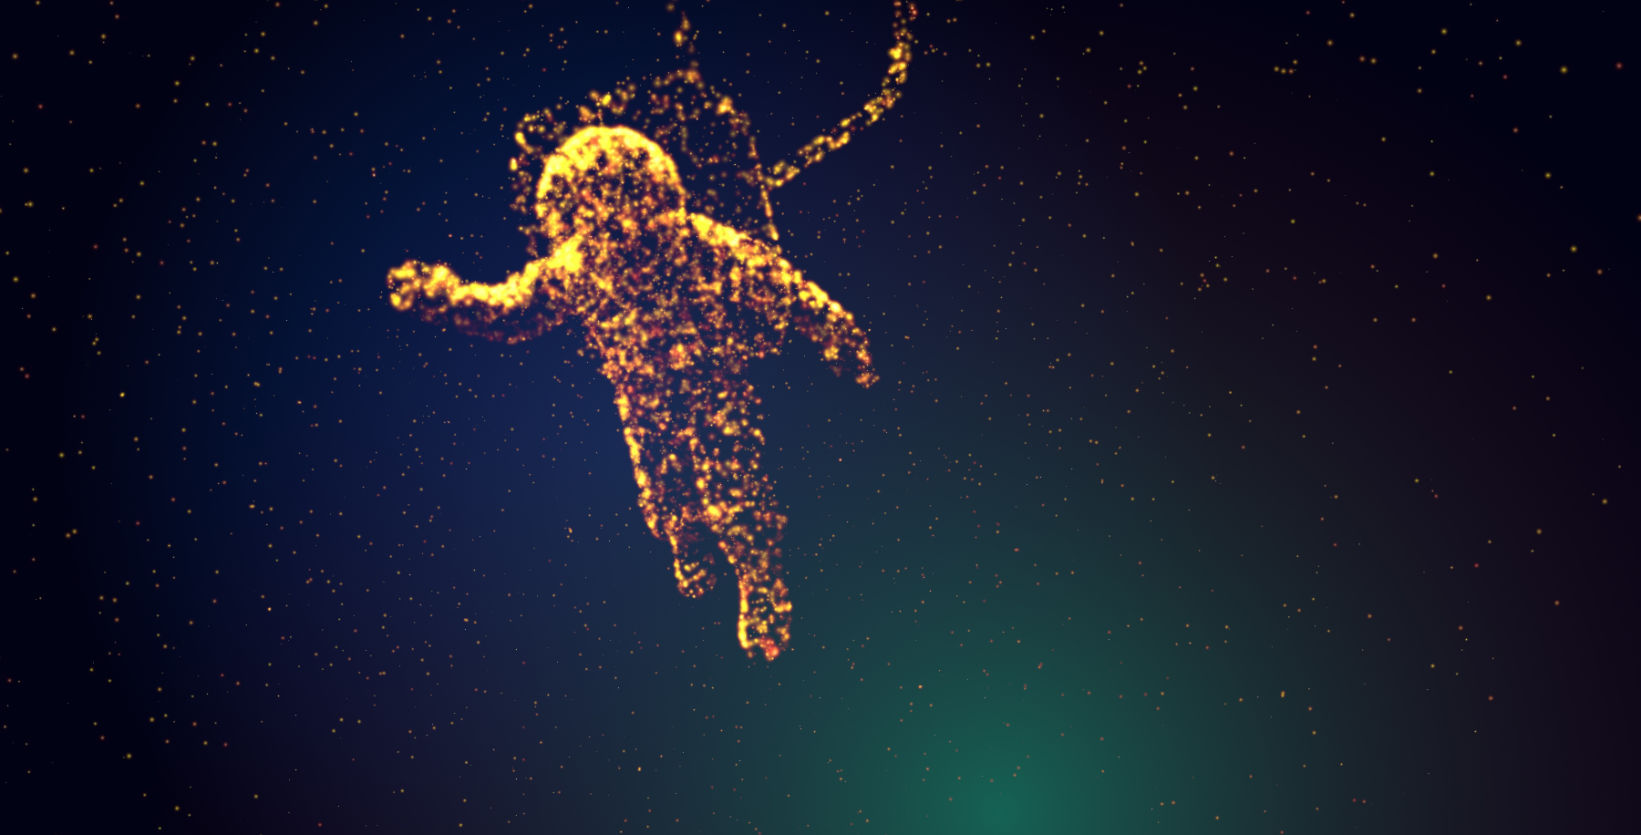 Particle astronaut floating in space